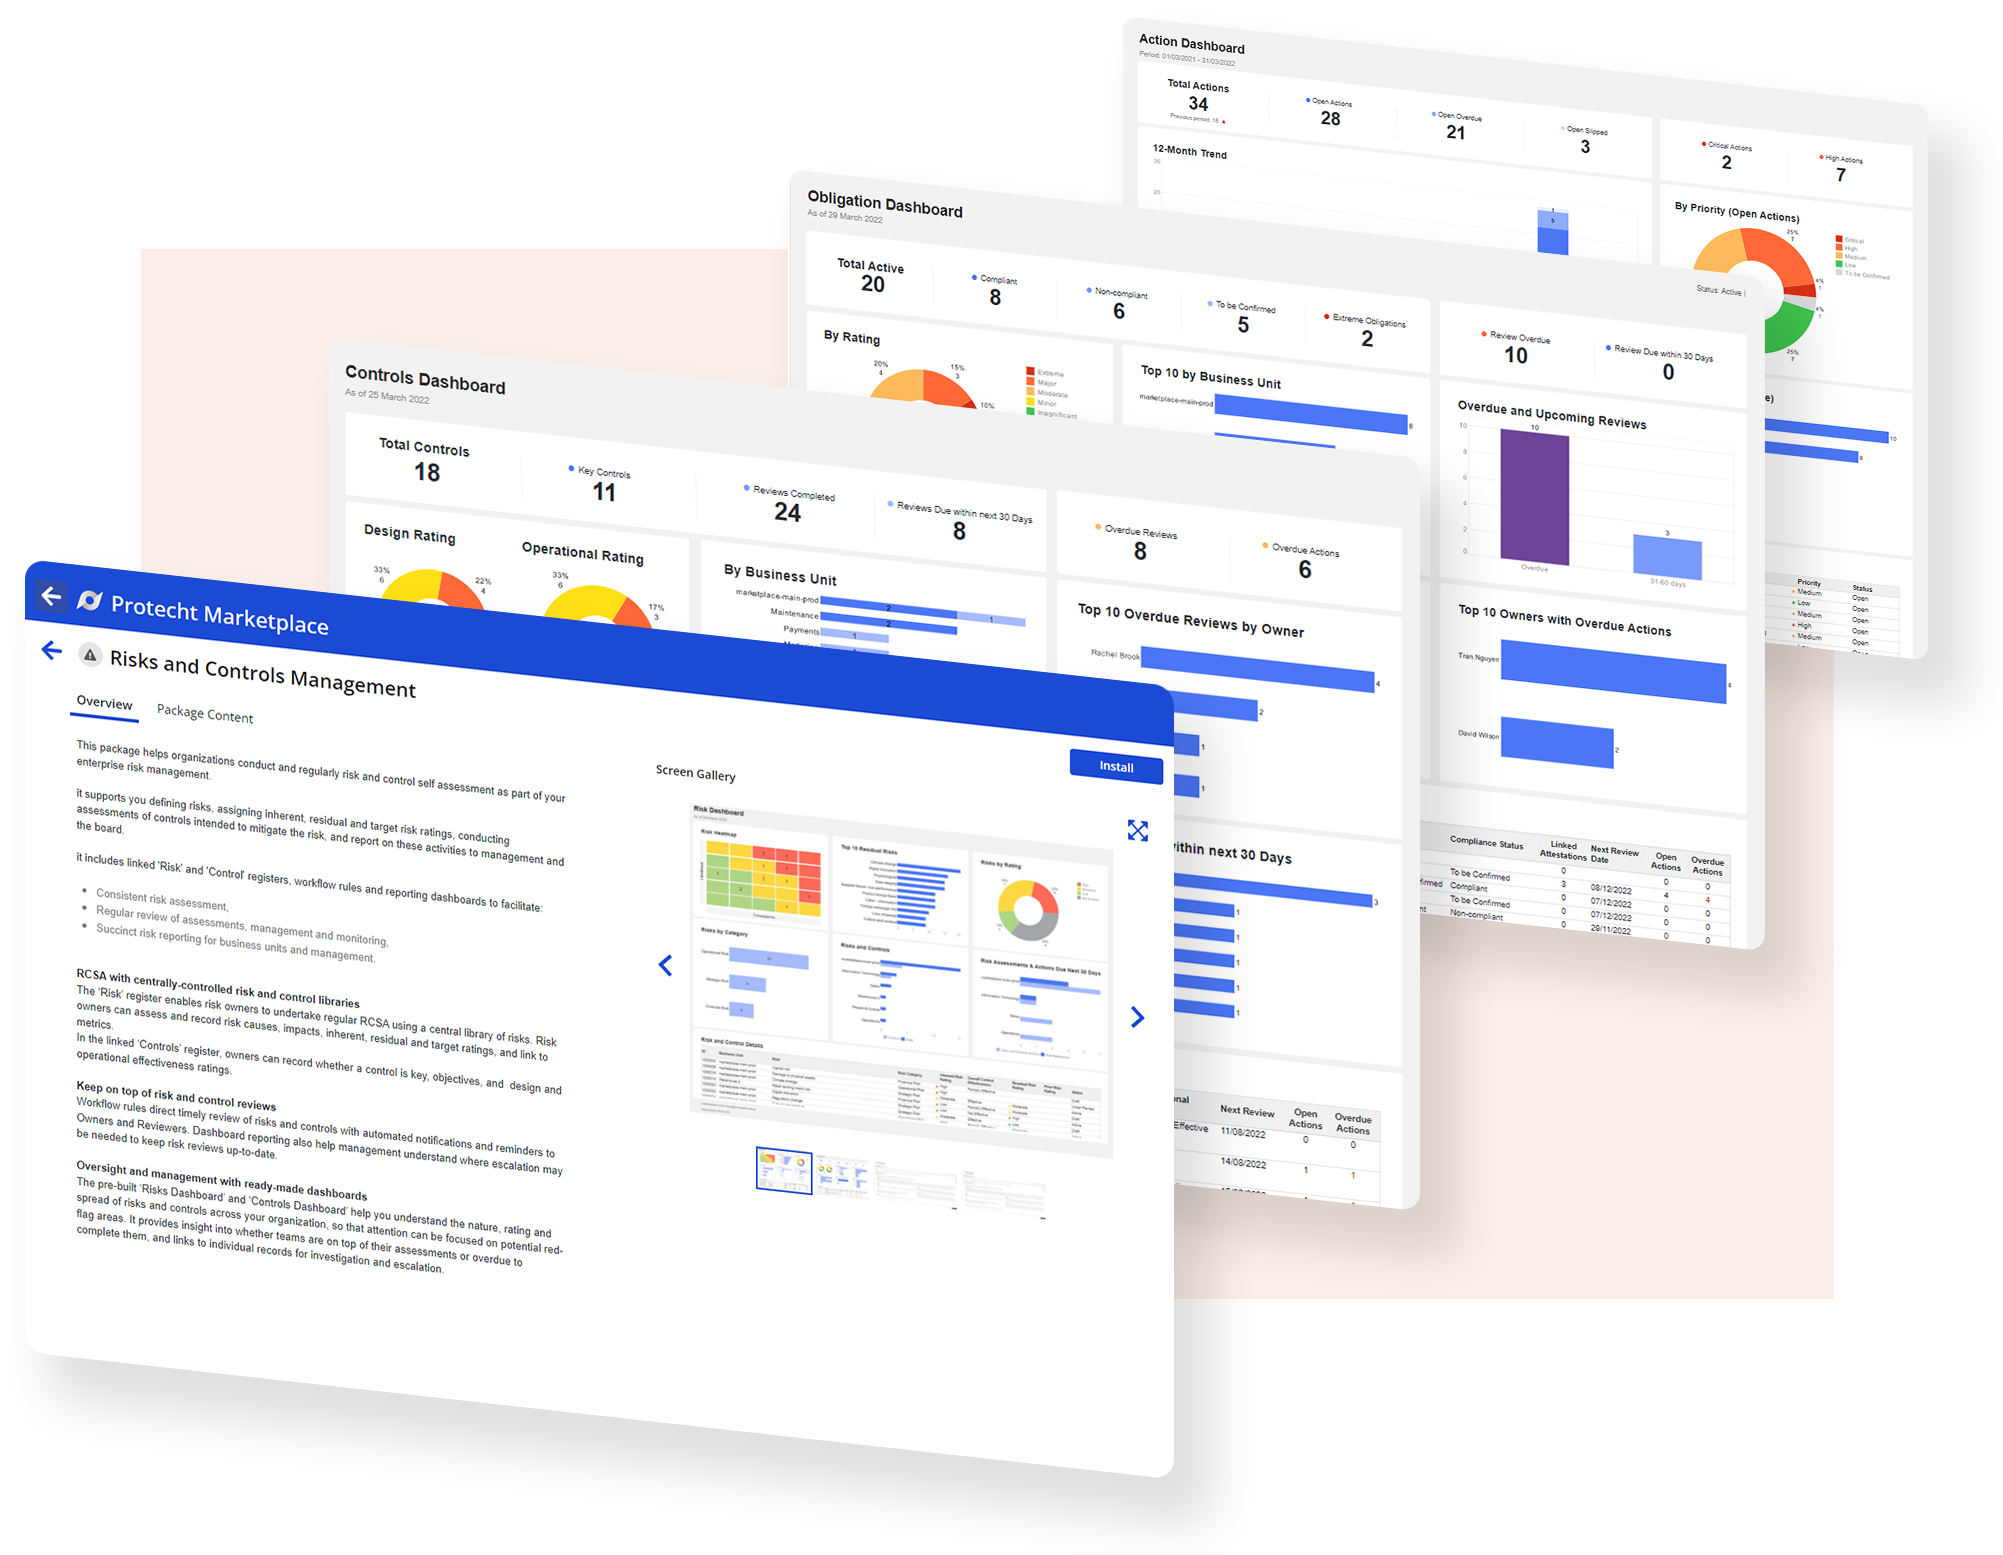 Protecht Marketplace dashboard packages